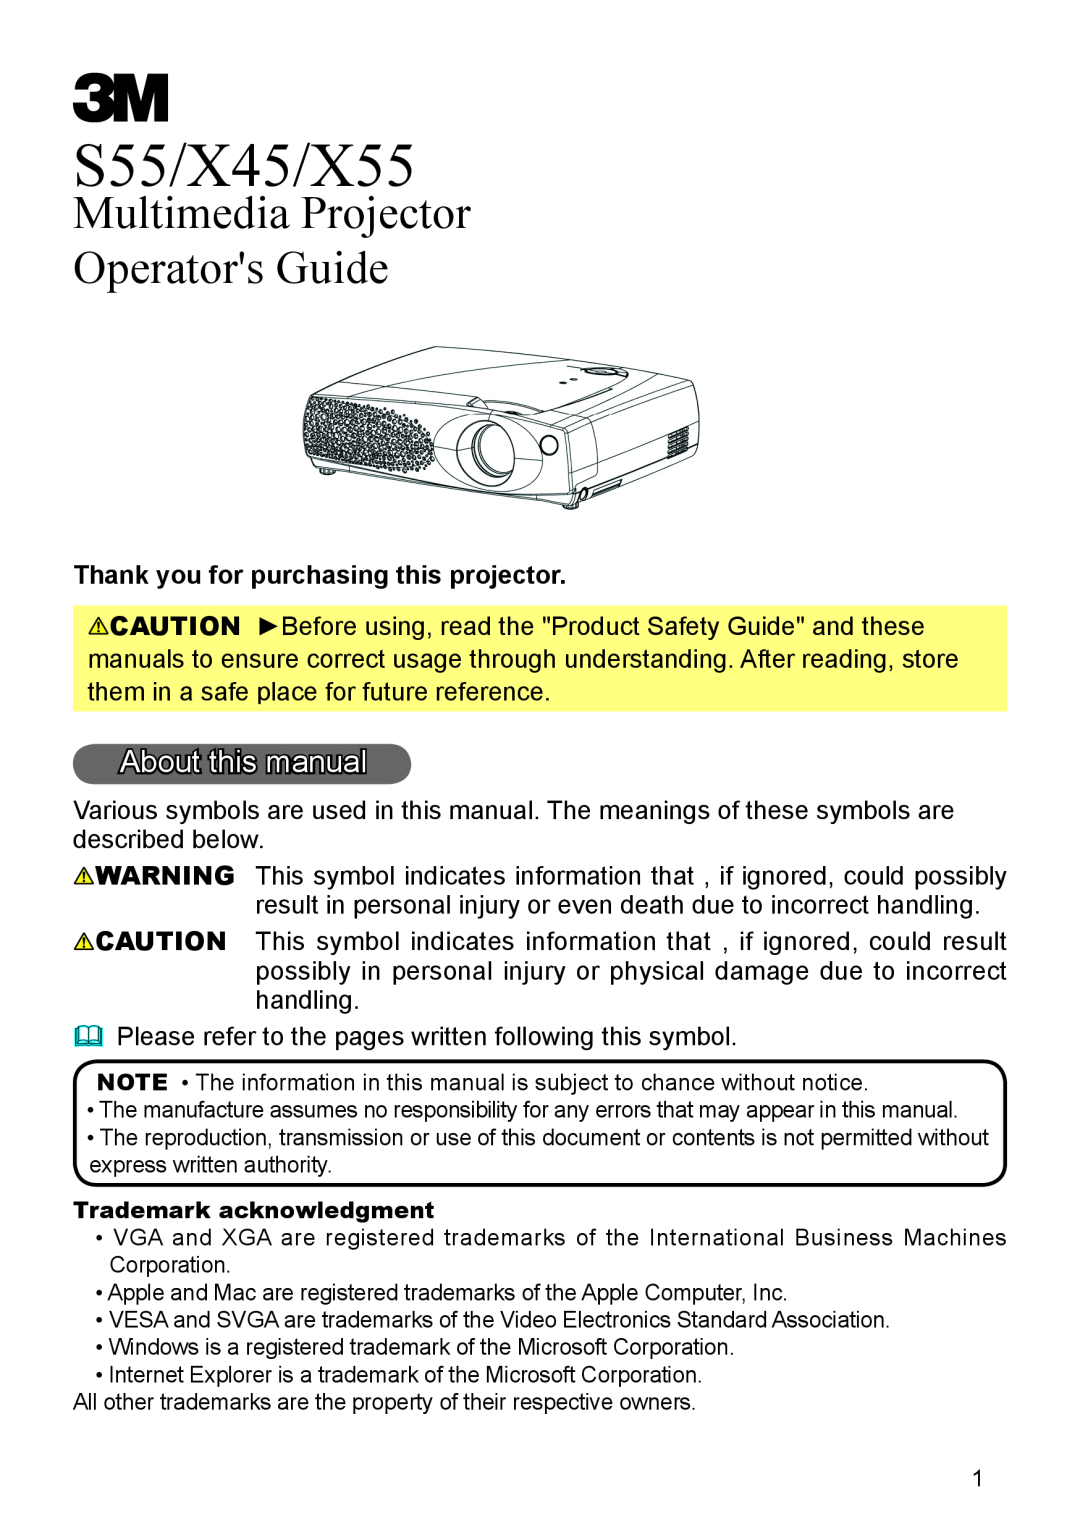 3M manual About this manual, Thank you for purchasing this projector, S55/X45/X55, Multimedia Projector Operators Guide 